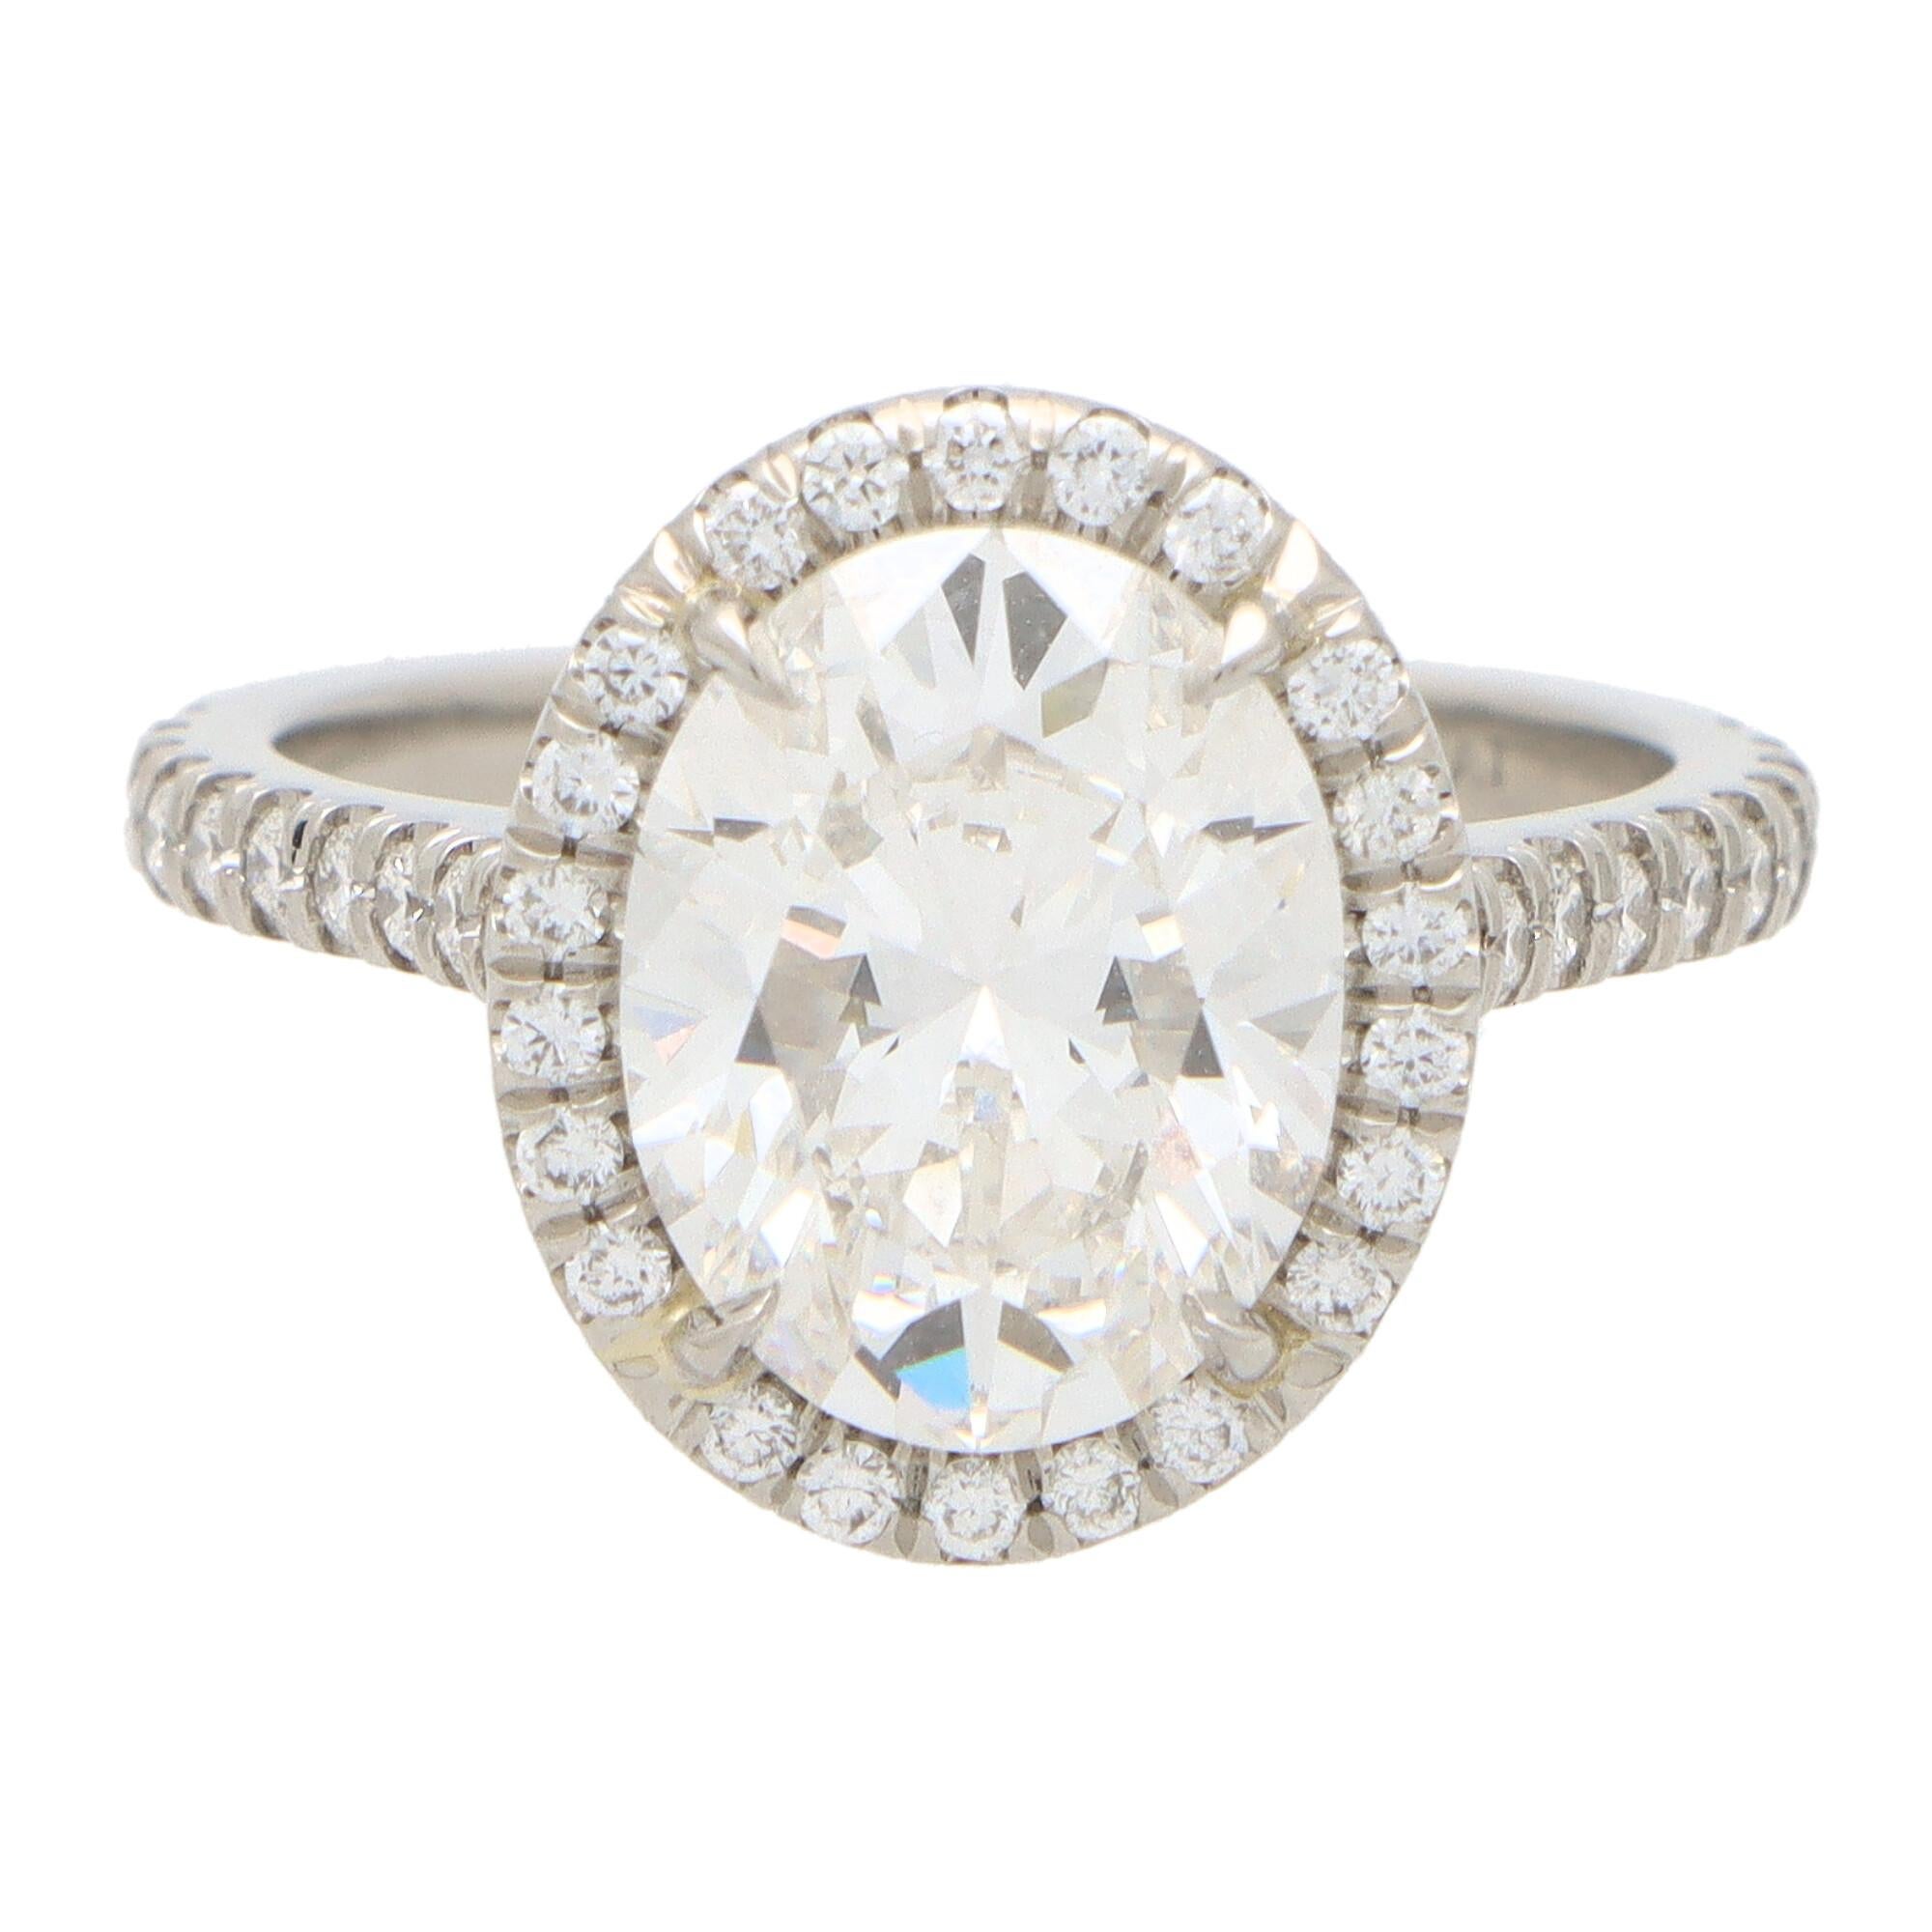 GIA Certified Contemporary Oval Cut Diamond Halo Ring Set in Platinum